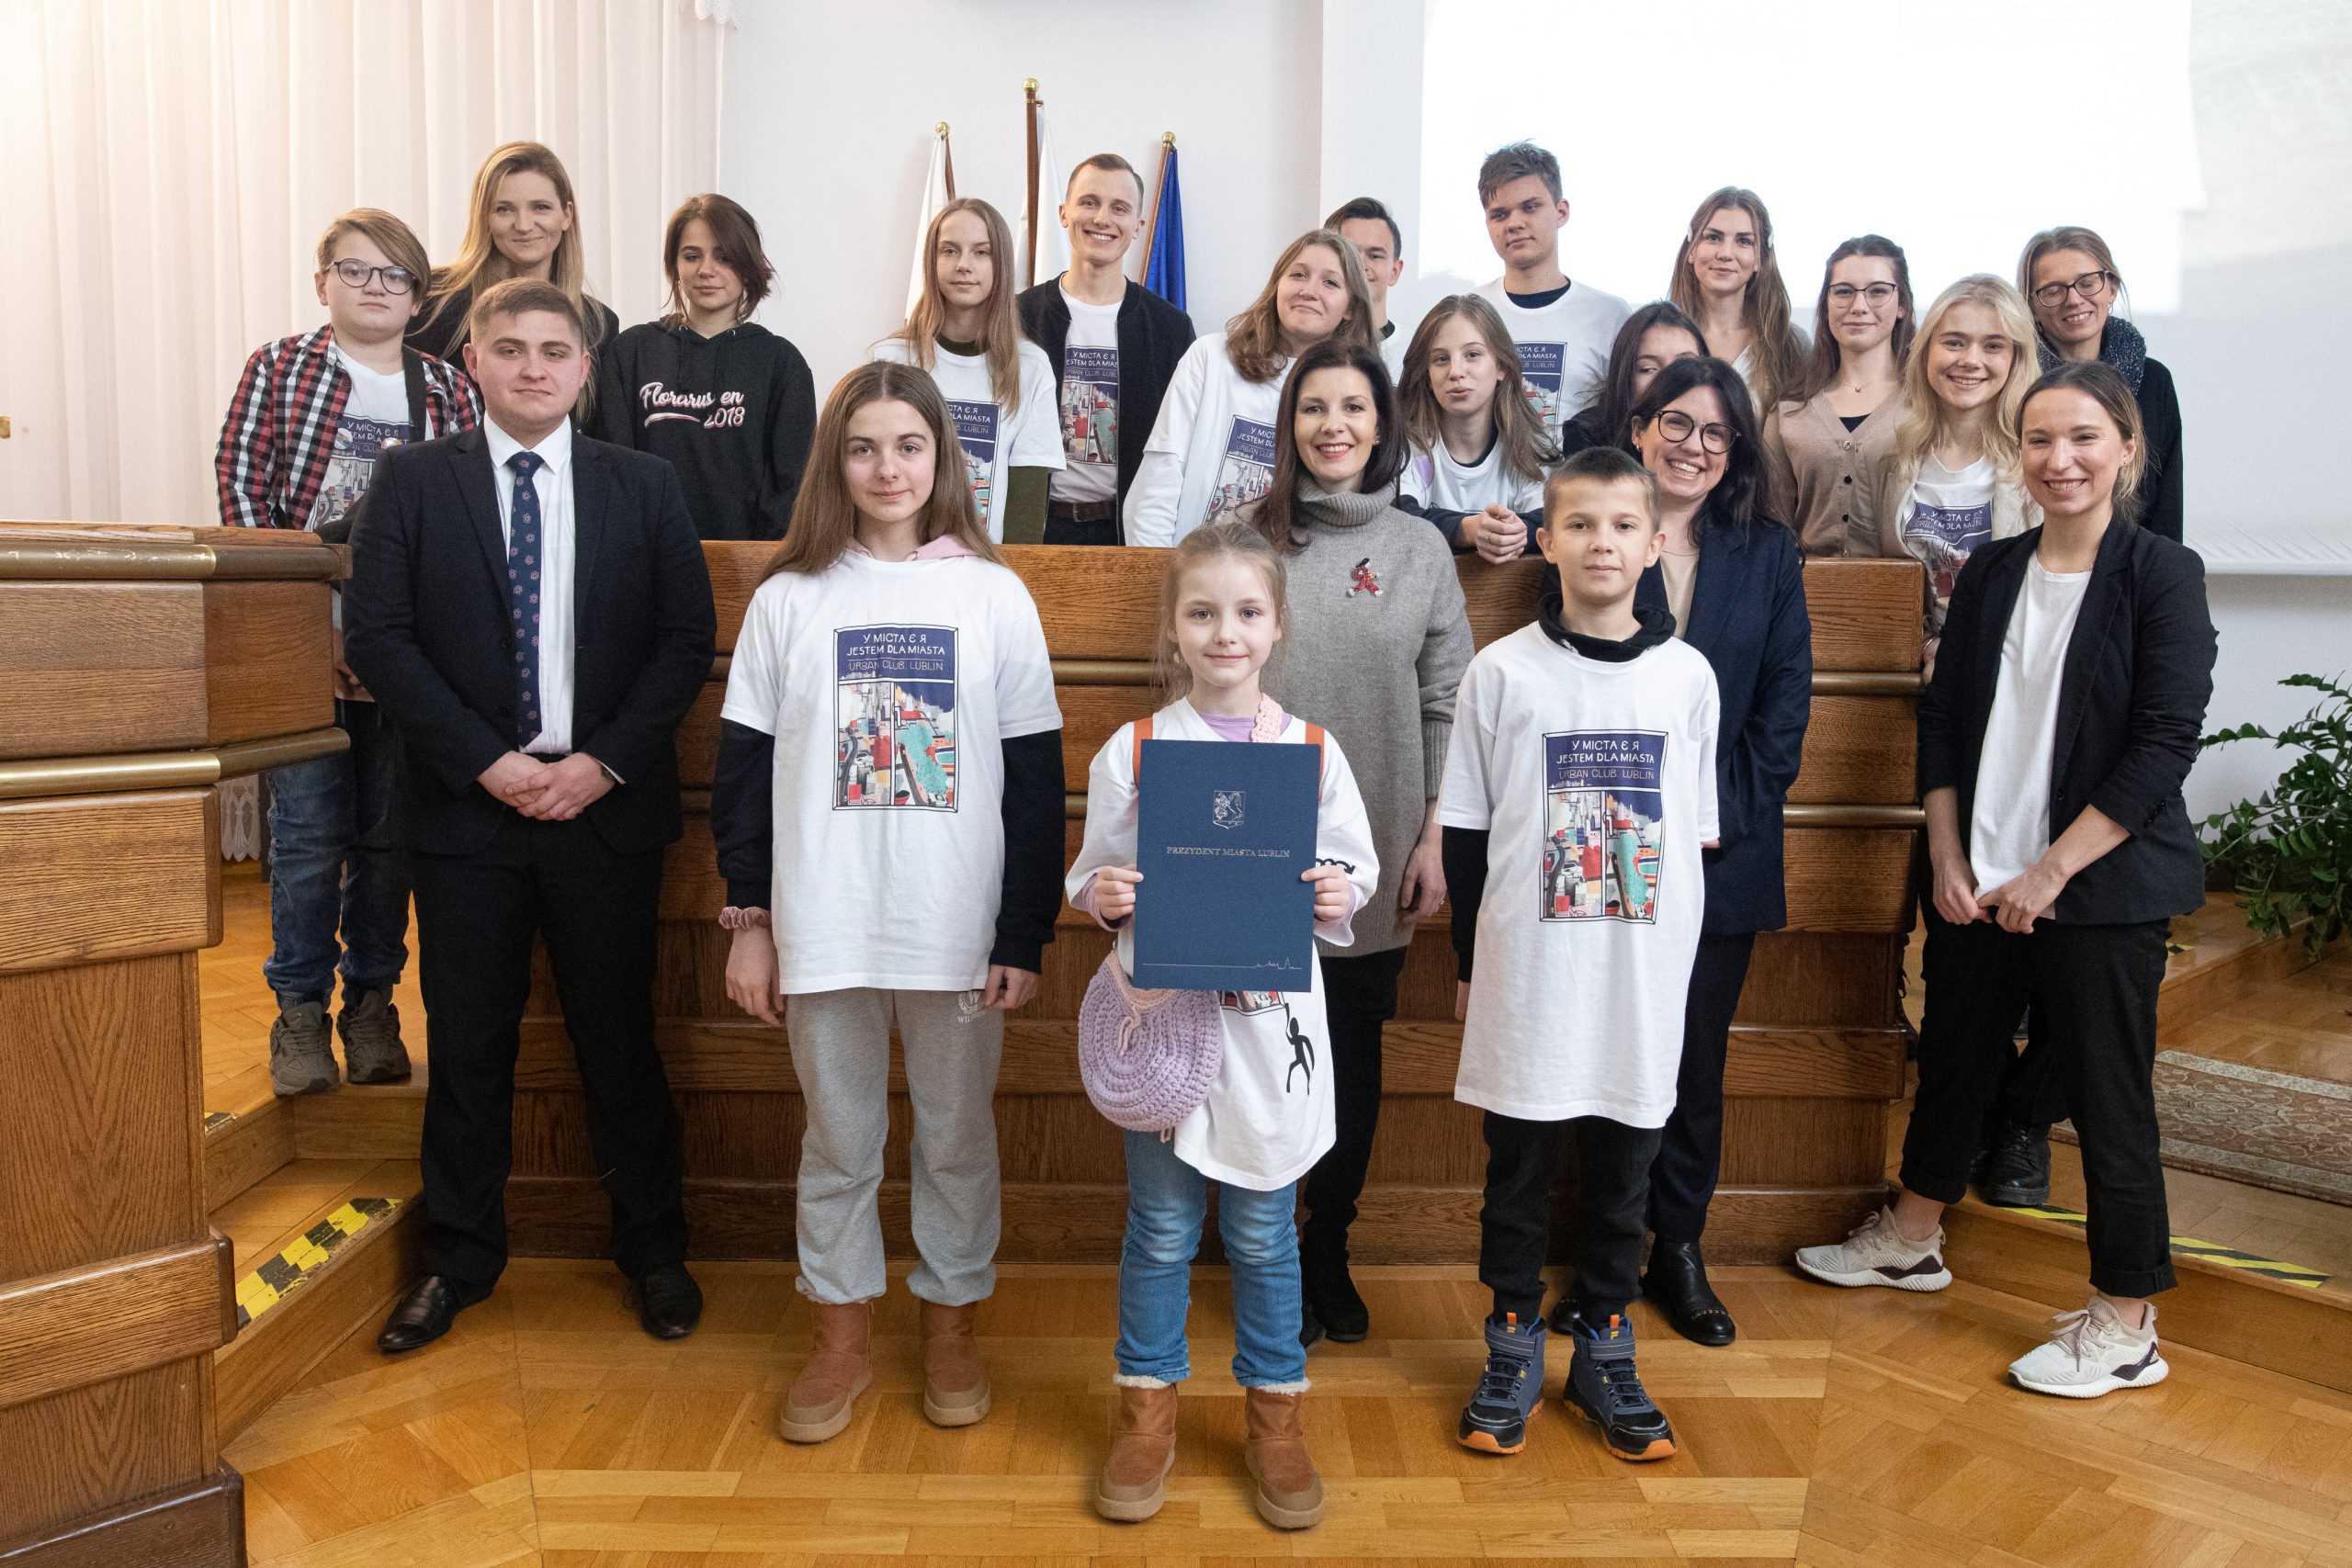 Lublin Urban Club: “We want children to know that they are the same city dwellers as adults”